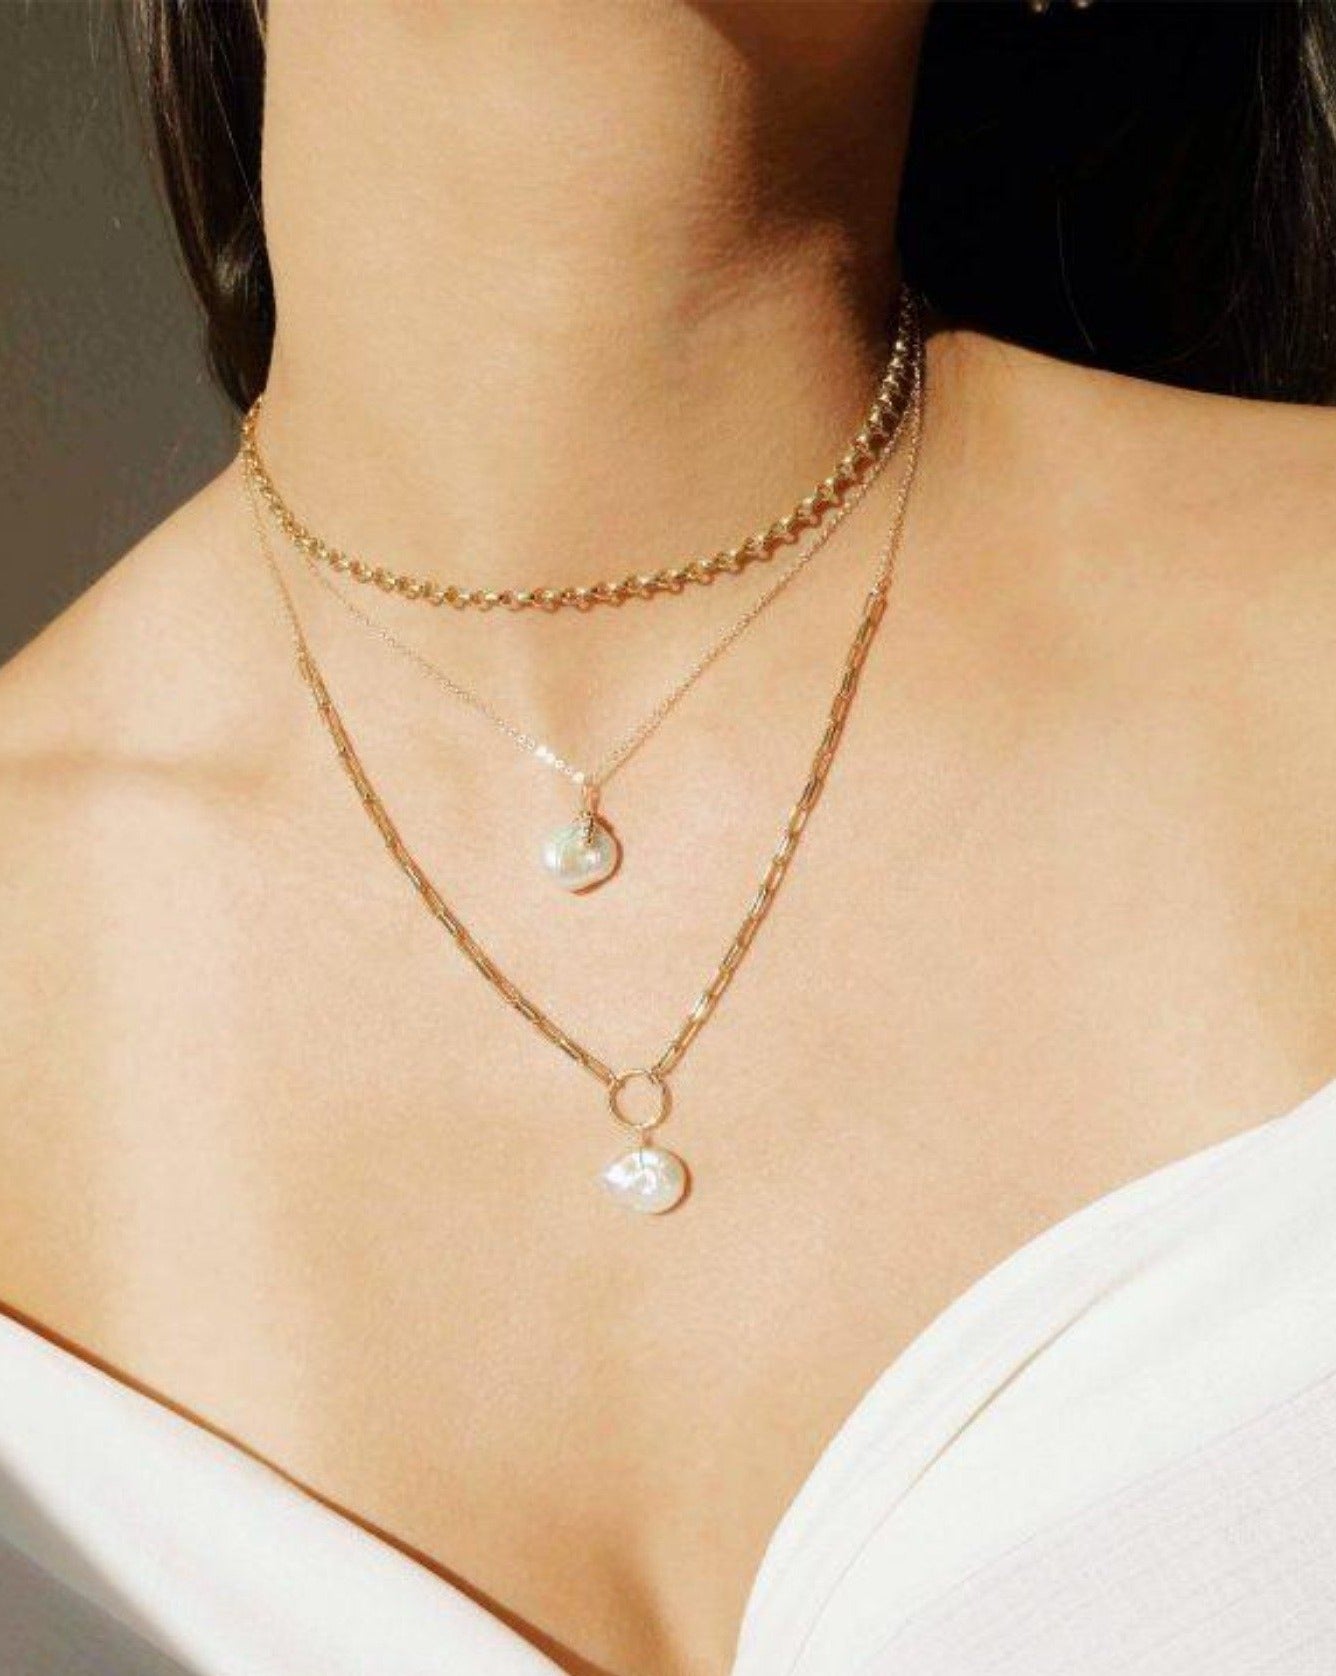 Vivian Necklace by KOZAKH. A 16 to 18 inch adjustable length necklace, crafted in 14K Gold Filled, featuring a Keshi White pearl.